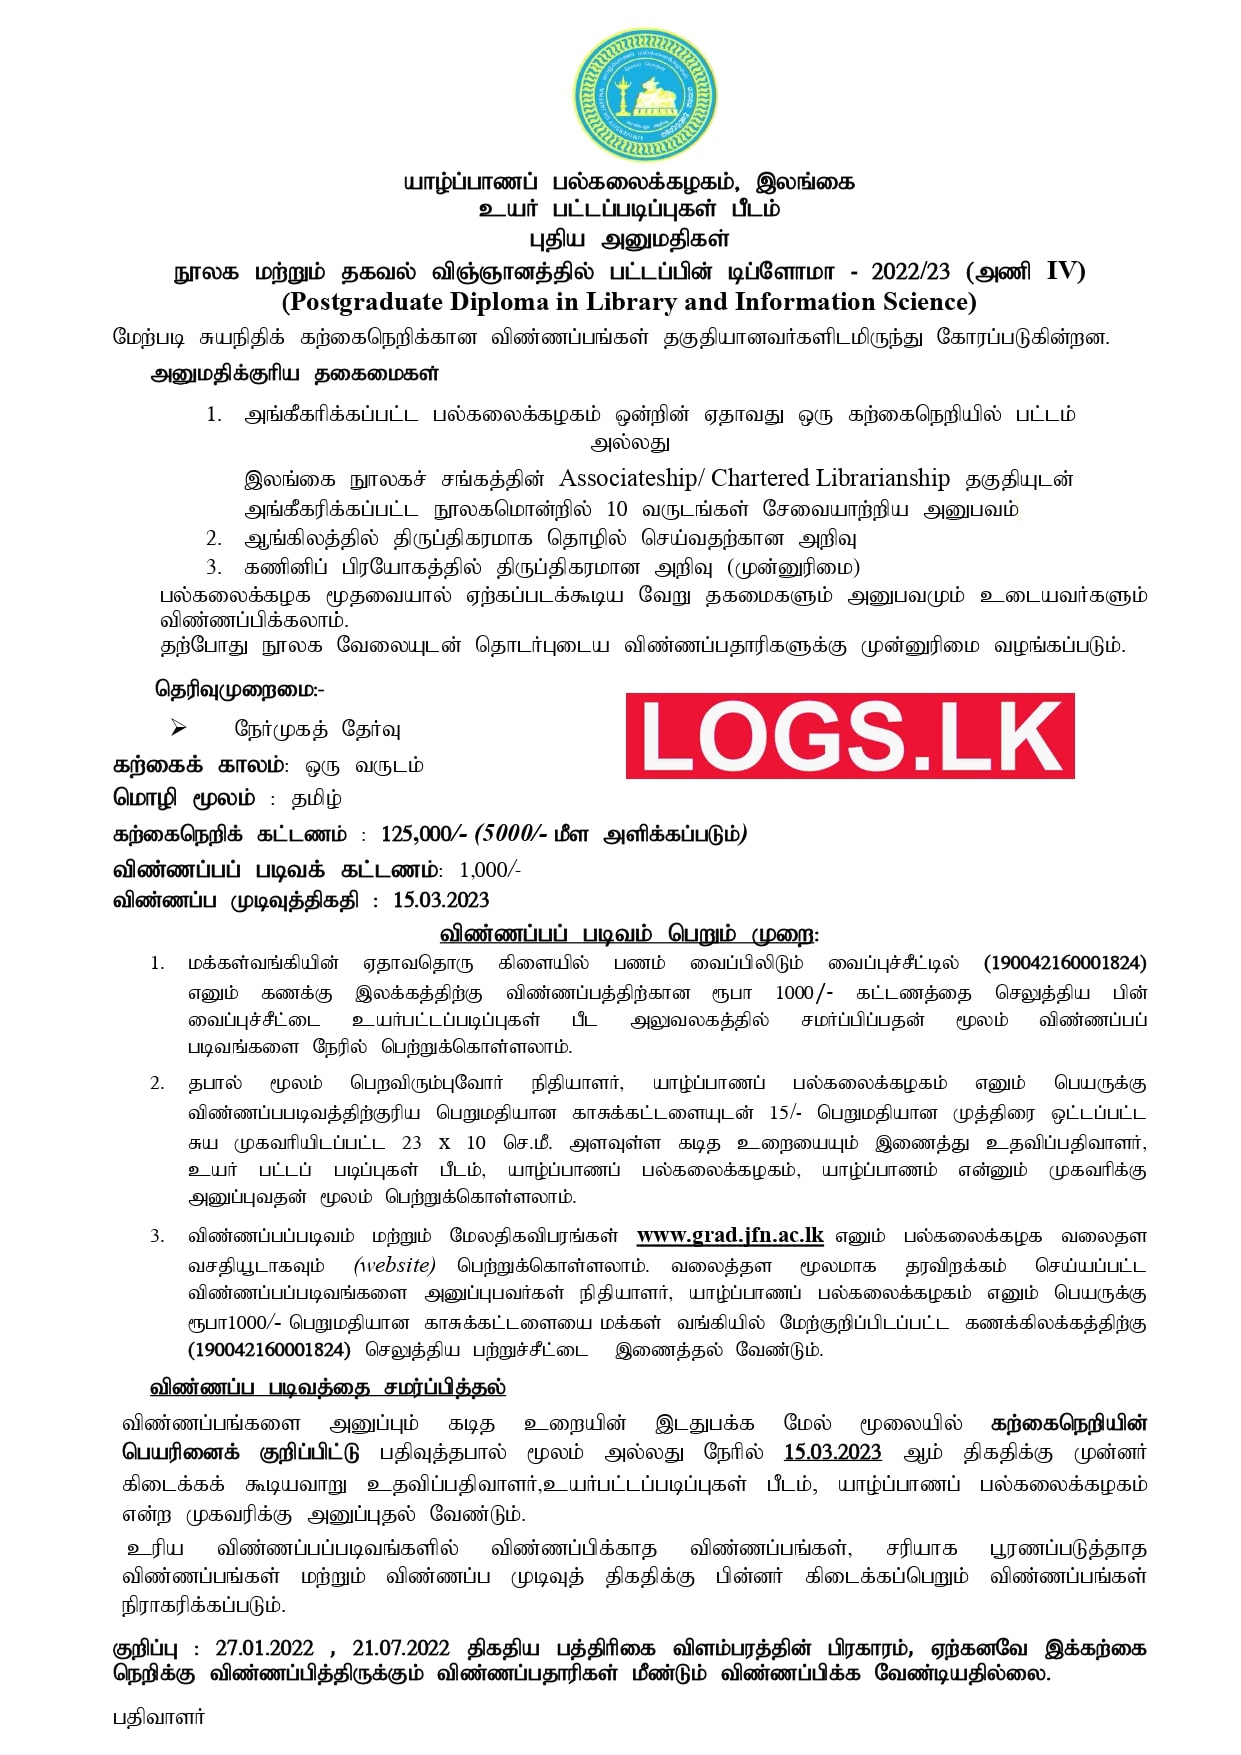 Diploma in Library and Information Science 2023 University of Jaffna Courses Application Form, Details Download